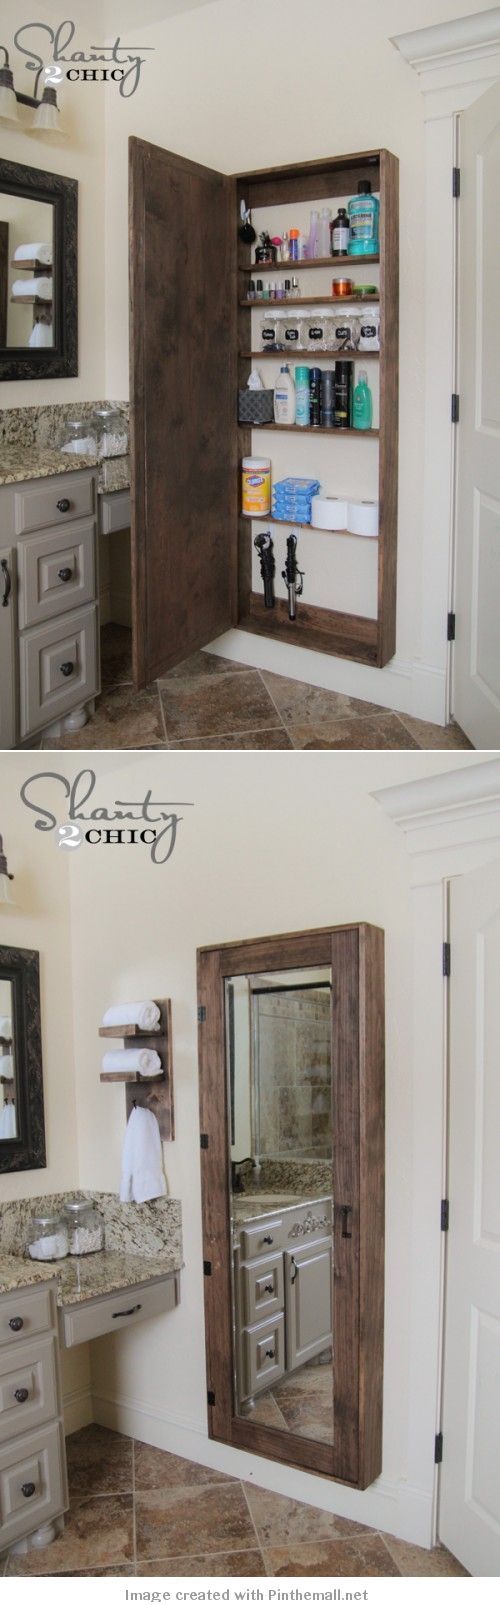 DIY Mirrored Medicine Cabinet Tutorial, Along with Organizational Tips.